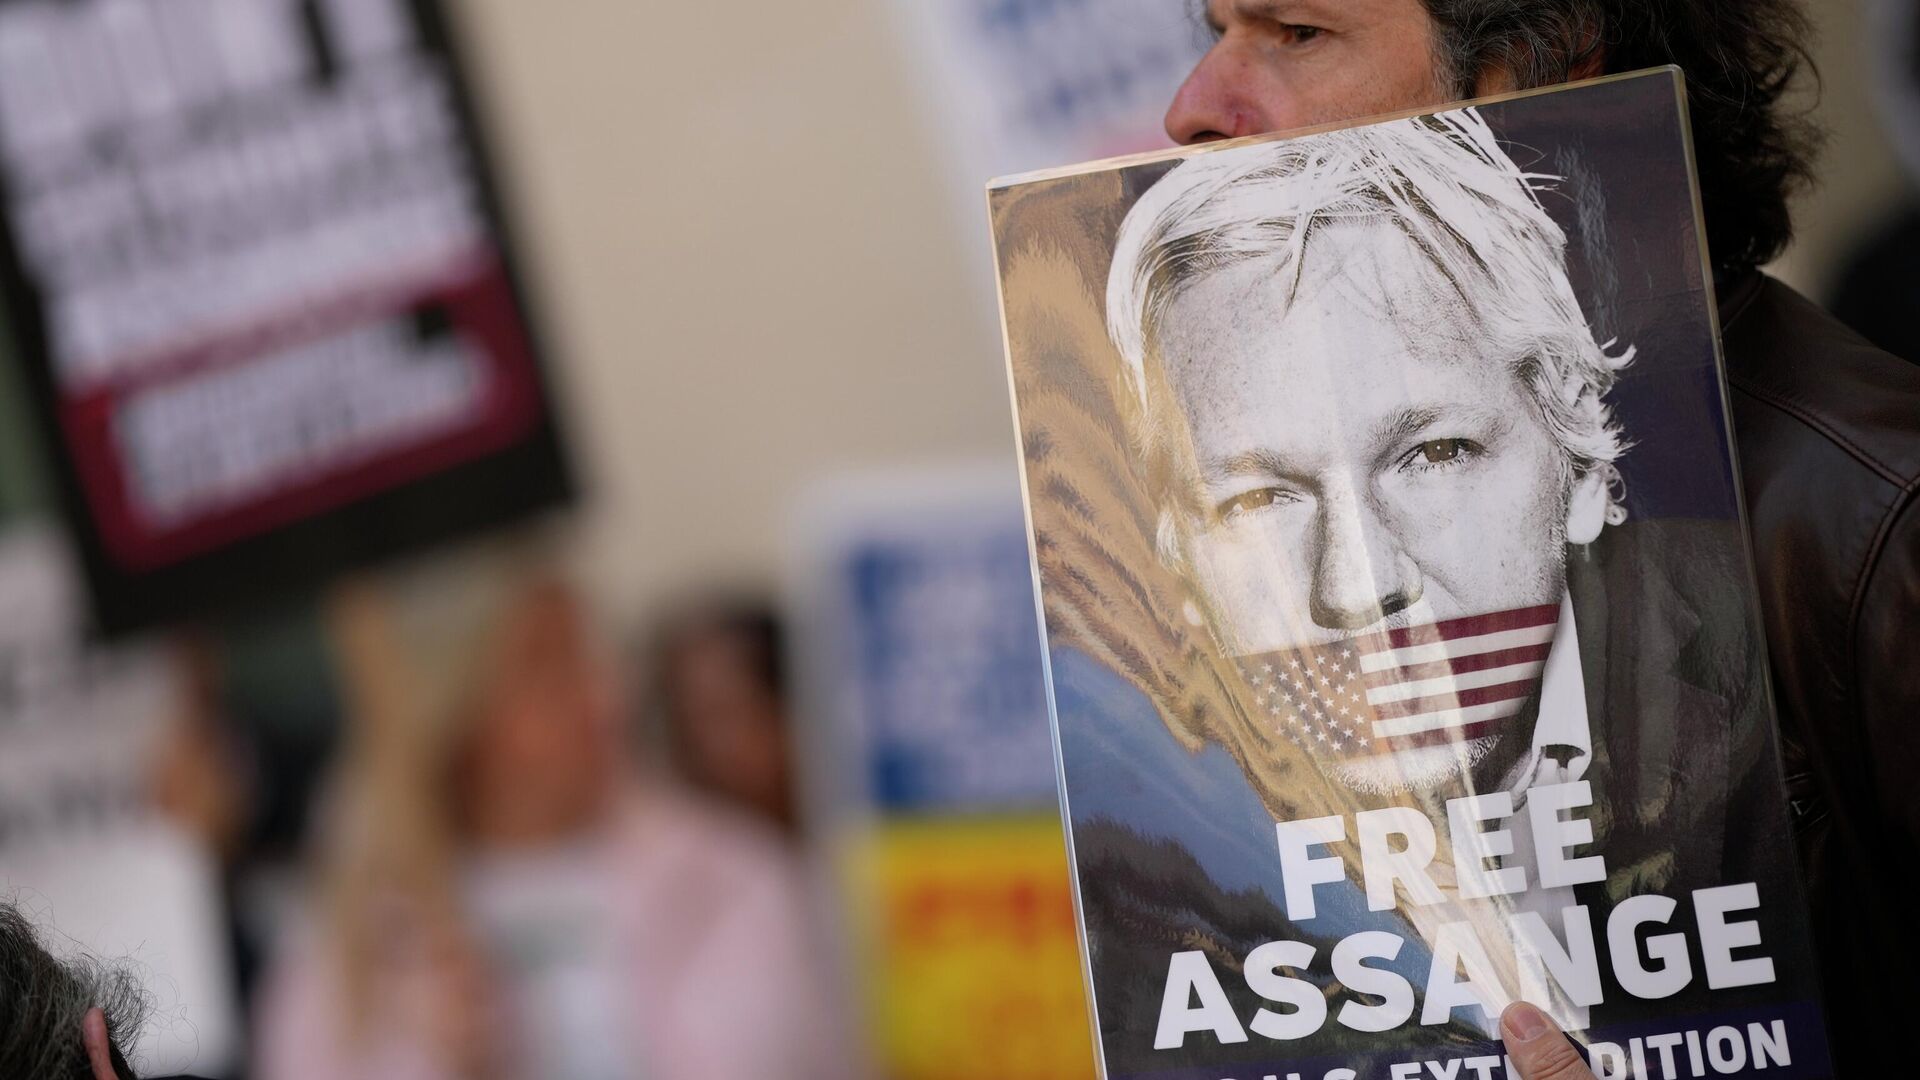 Wikileaks founder Julian Assange supporters hold placards as they gather outside Westminster Magistrates court In London, Wednesday, April 20, 2022. - Sputnik International, 1920, 23.11.2022